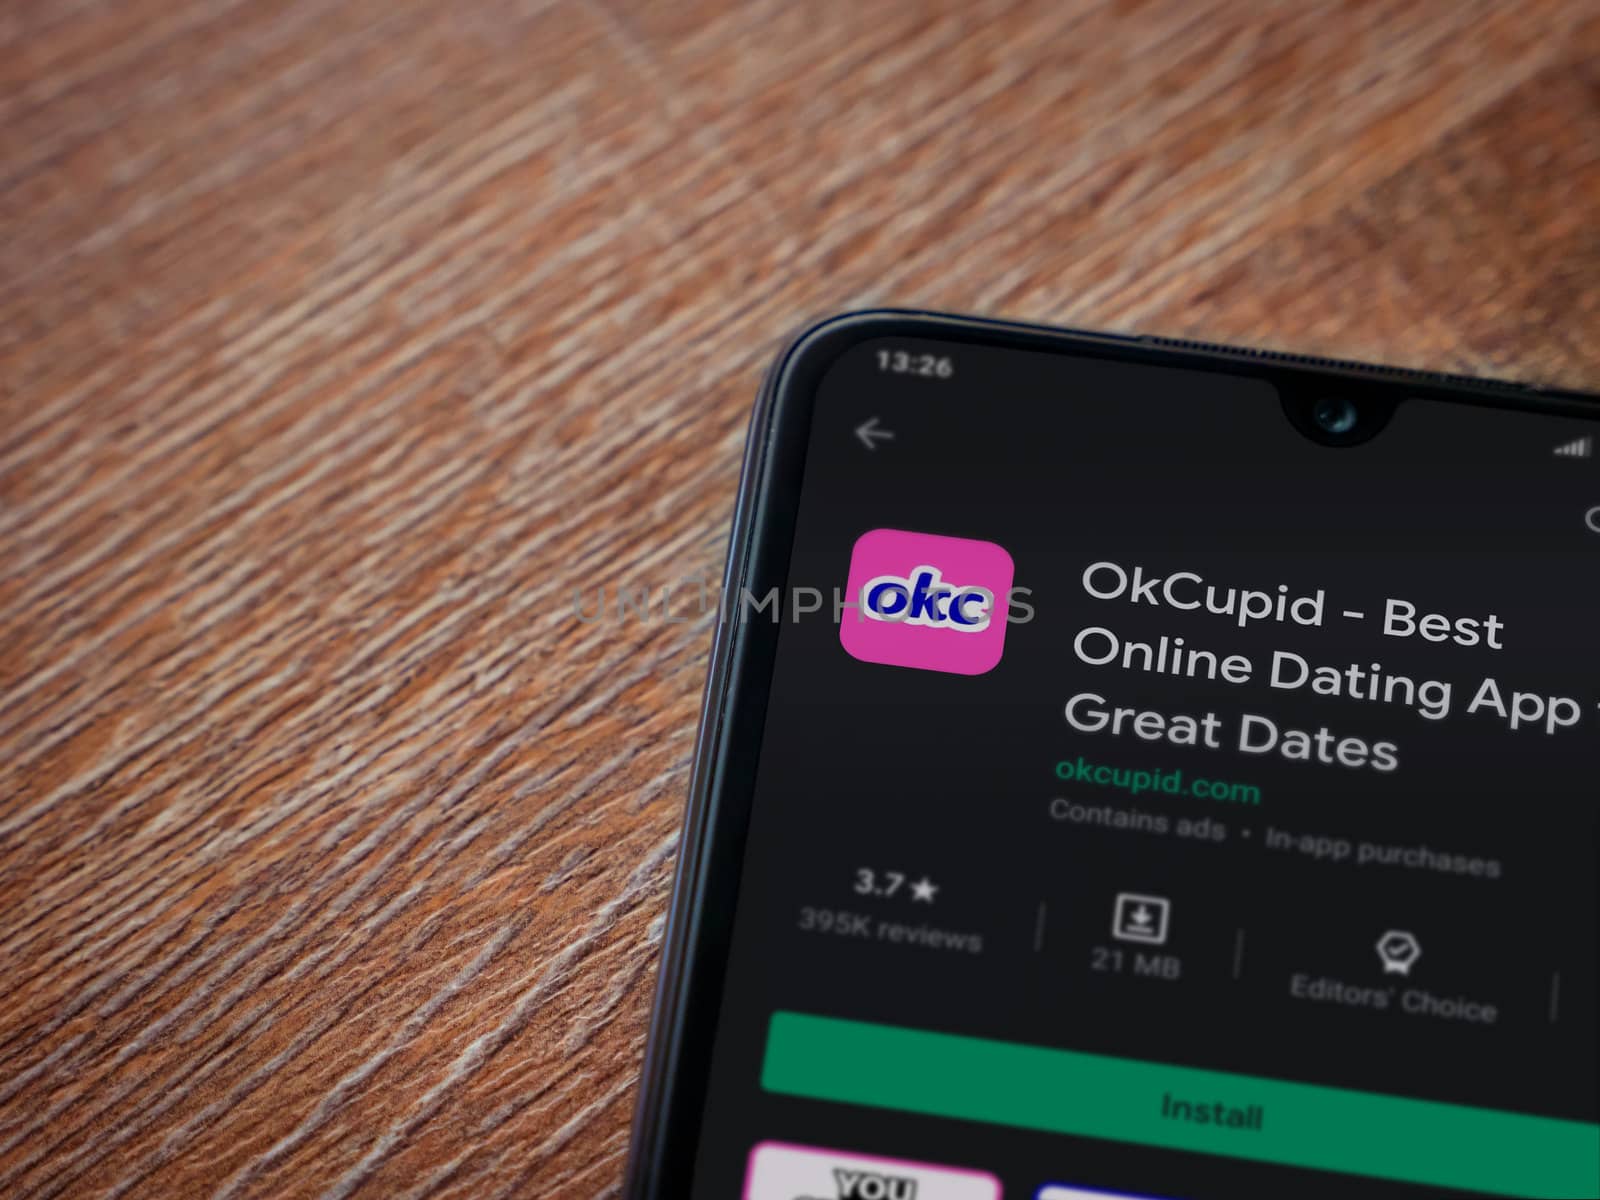 Lod, Israel - July 8, 2020: OkCupid app play store page on the display of a black mobile smartphone on wooden background. Top view flat lay with copy space.